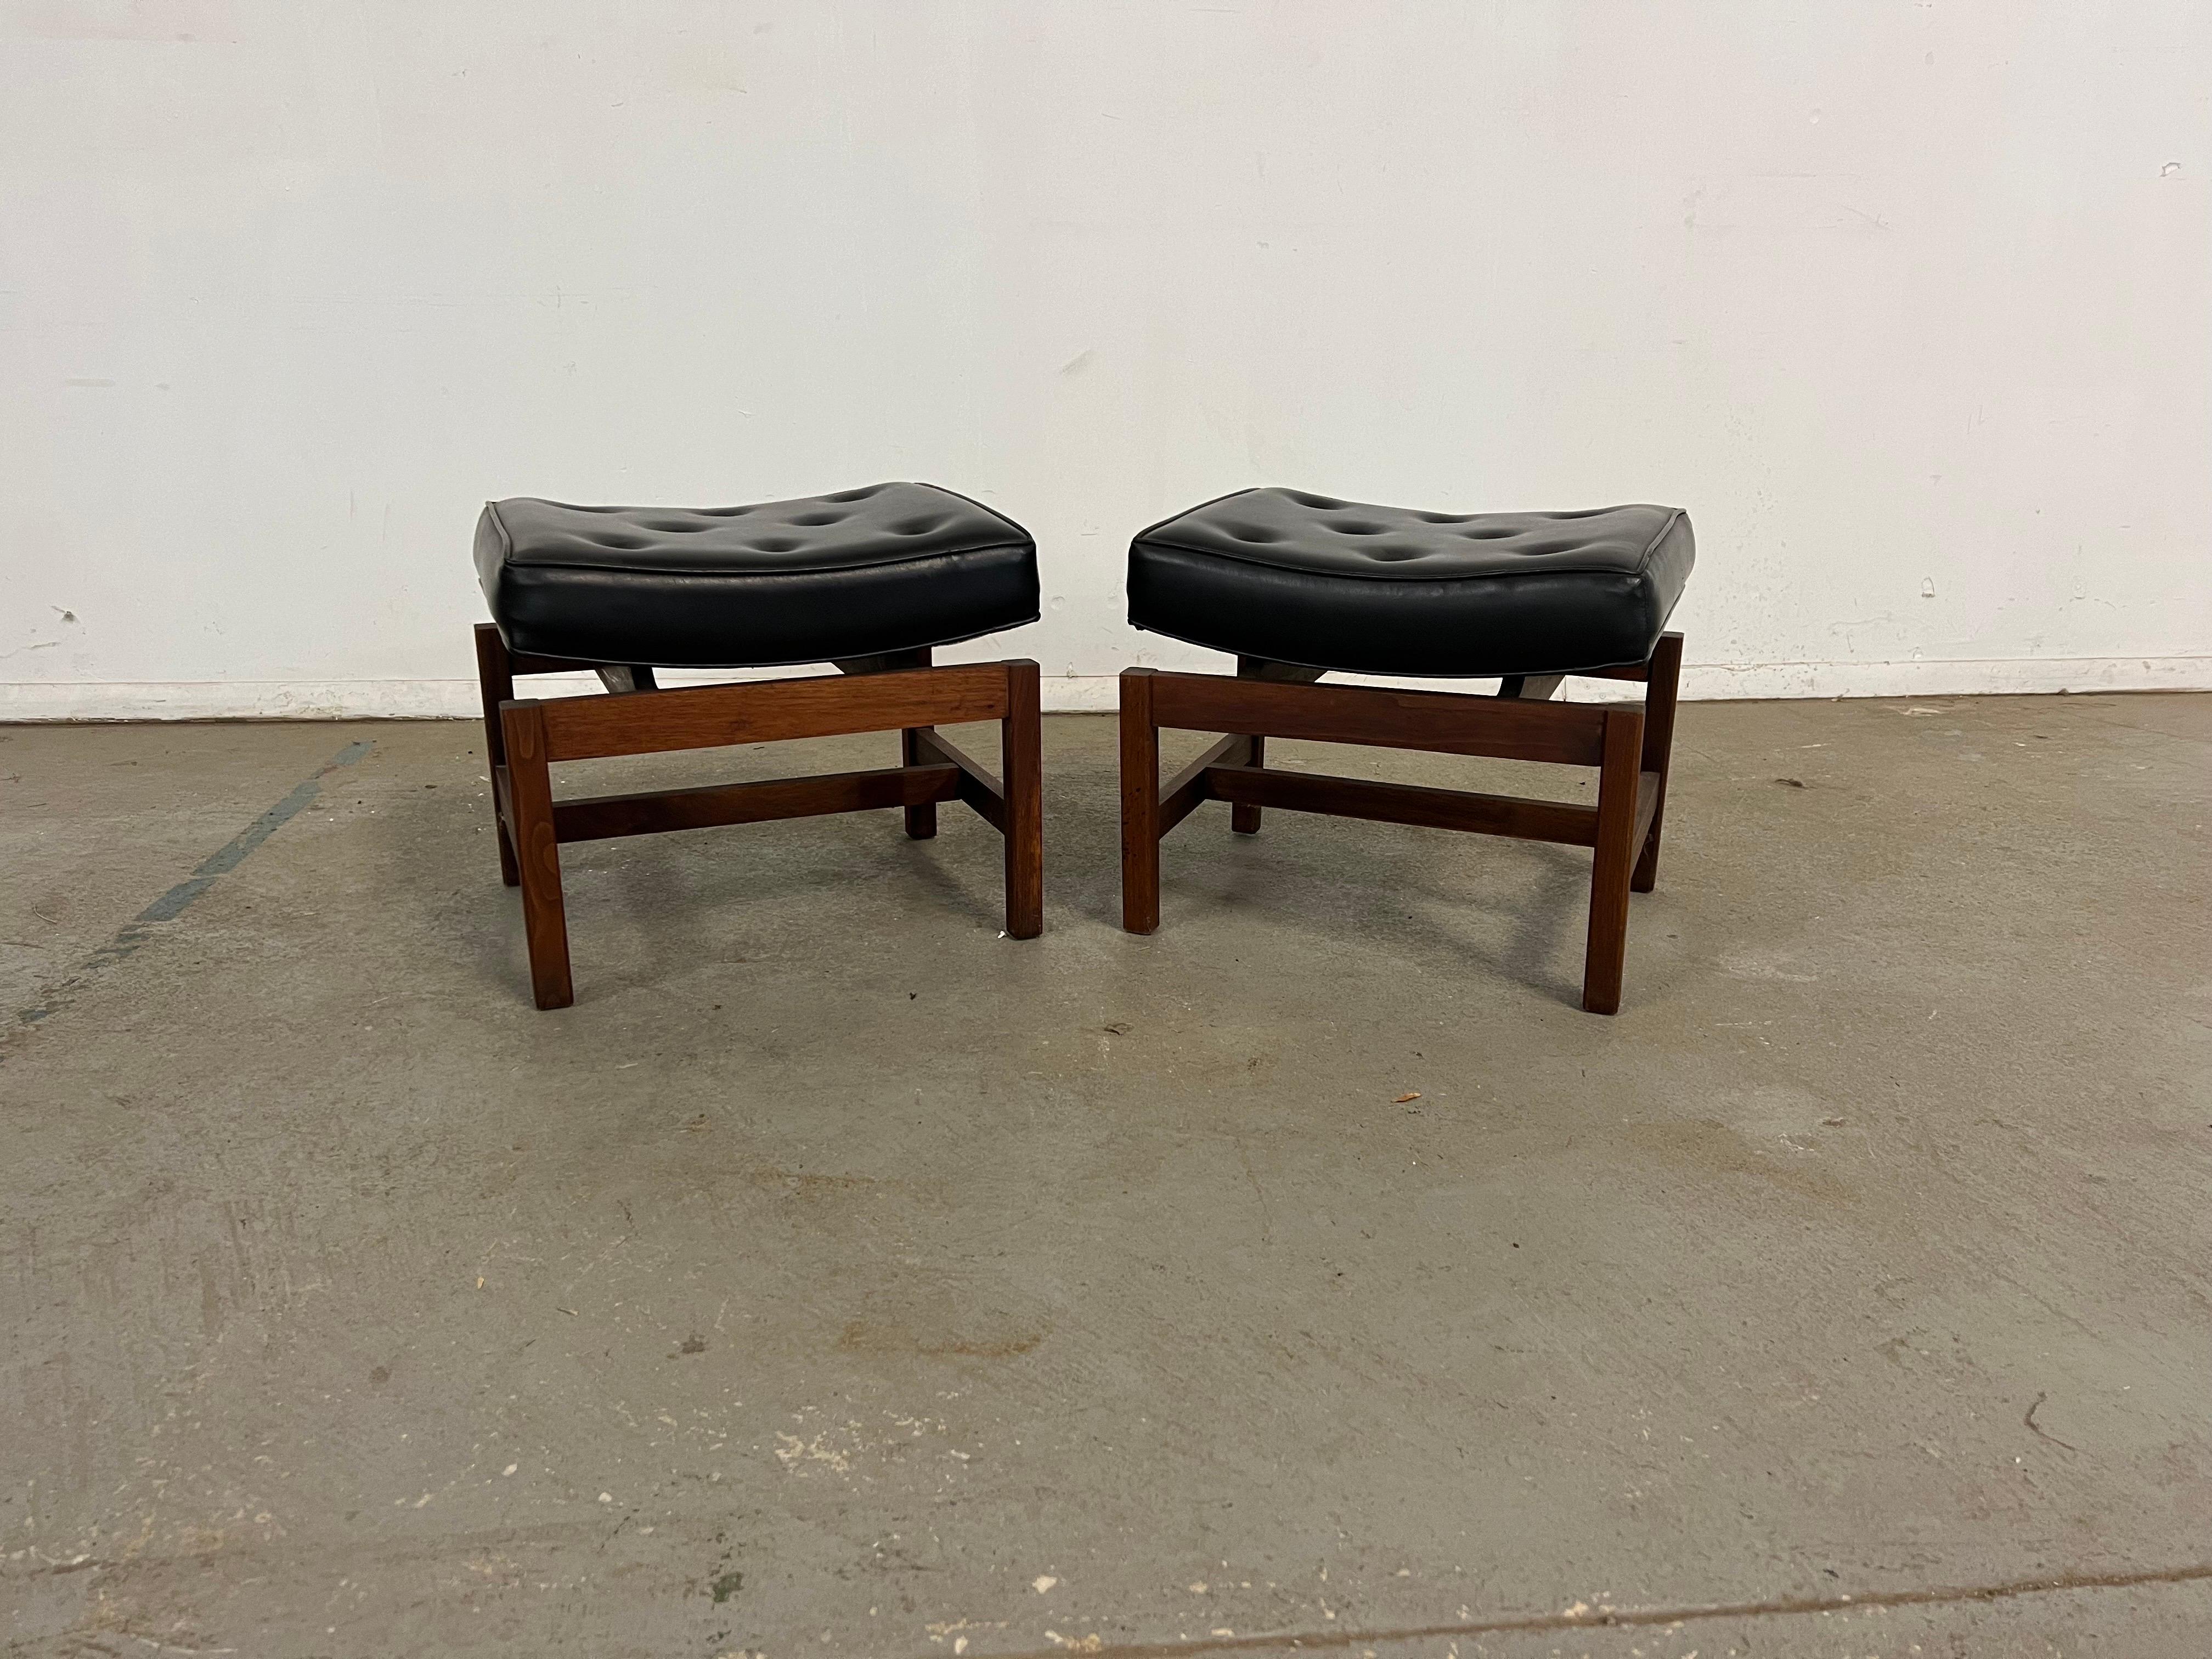 Pair of Mid Century  Modern Jens Risom Floating Top Walnut Stools
Offered is a Pair of Mid Century  Modern Jens Risom Floating Top Walnut Stools. This set includes two stools(we have amatching bench that accomodates these stool being sold